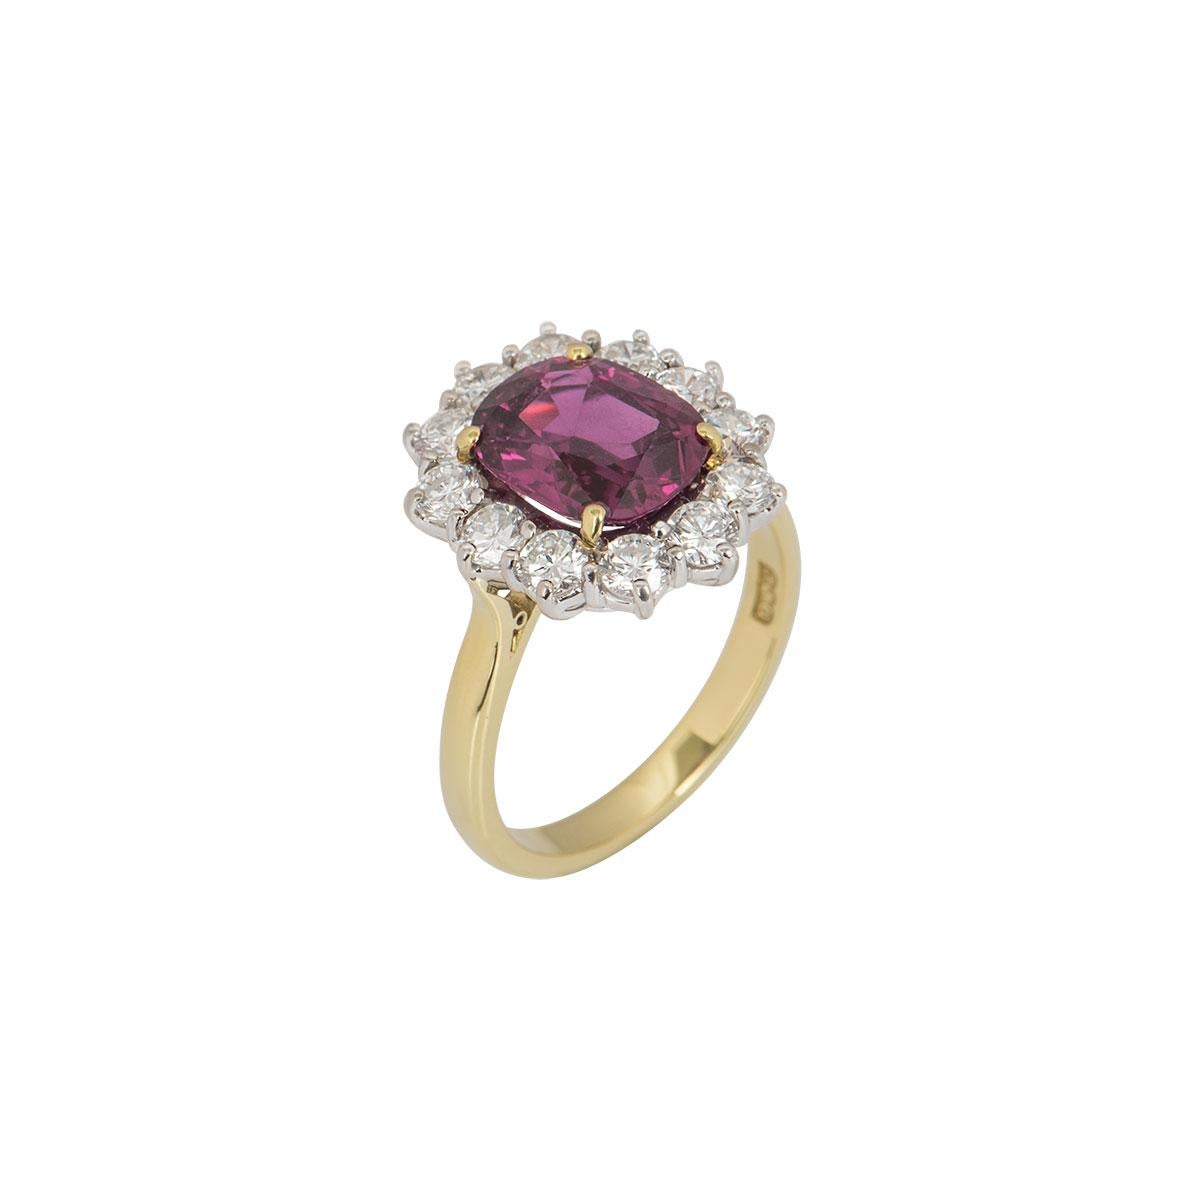 A beautiful 18k yellow gold diamond and ruby cluster ring. The ring is set to the centre with a ruby in a four claw setting dispersing a rich red hue throughout with the Origin as Thailand. Accentuating the central stone are 12 round brilliant cut